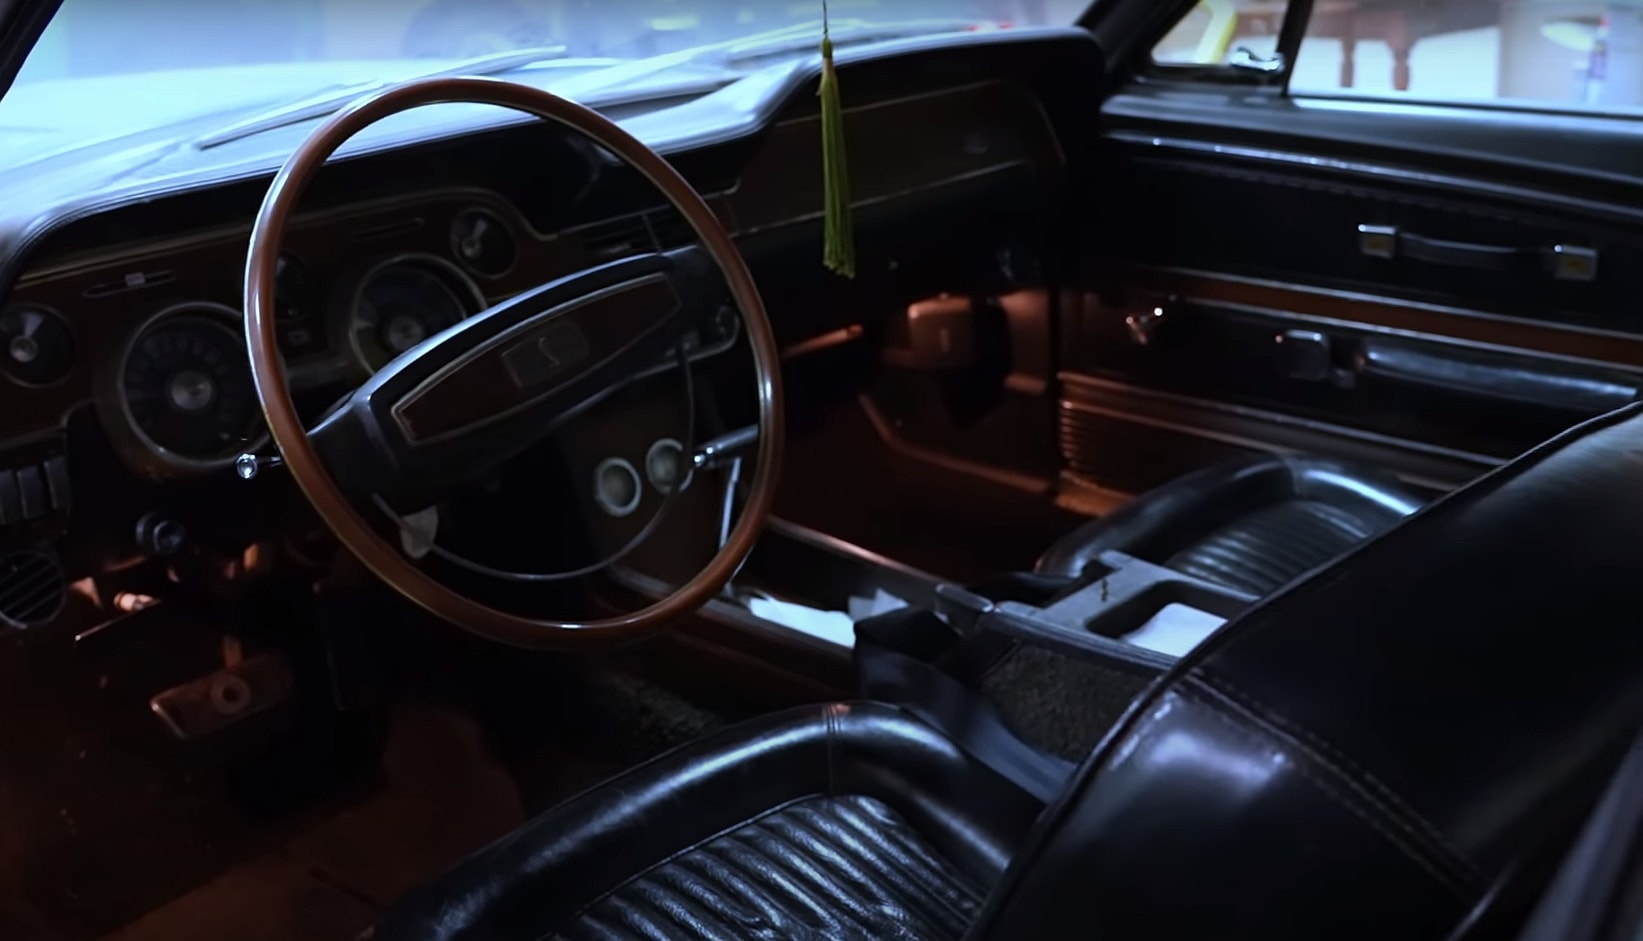 Rare Ford Mustang Finds Unveiling Hidden Treasures of Automotive History